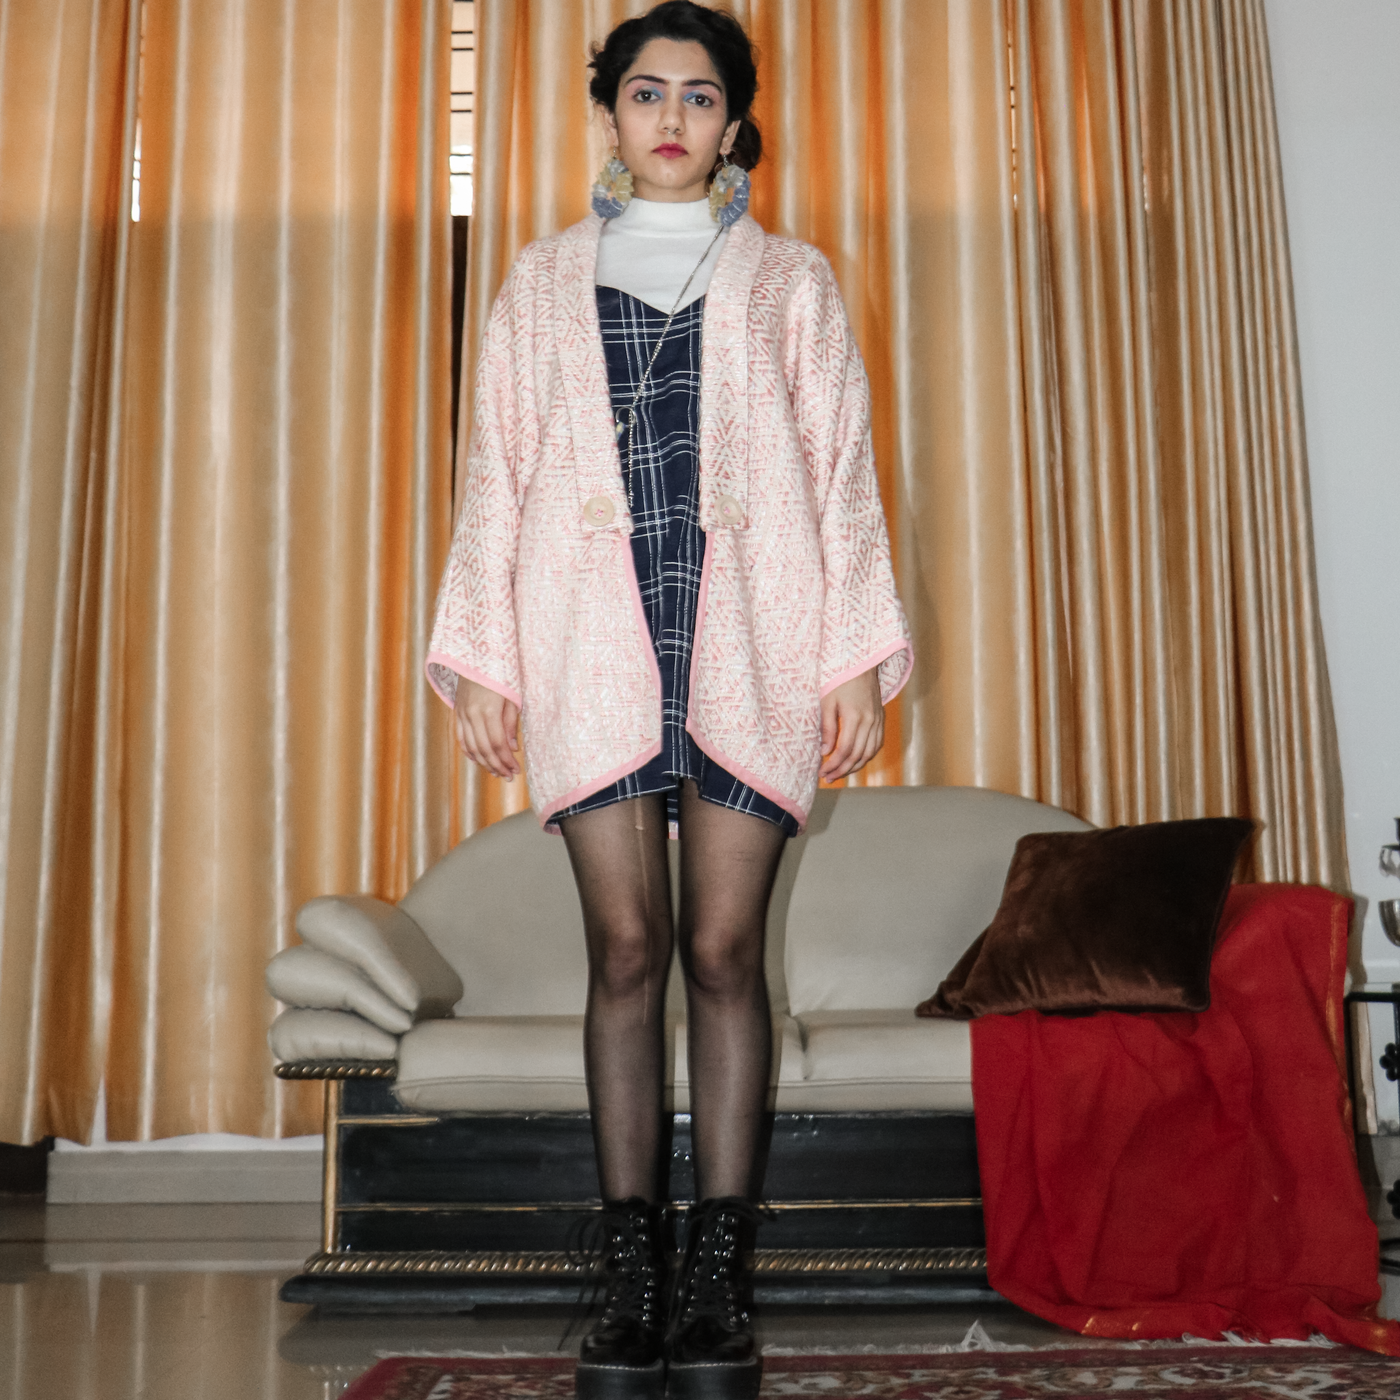 Pink and Off White coat made by upcycling upholstery fabric, it features dolman sleeves and wooden buttons